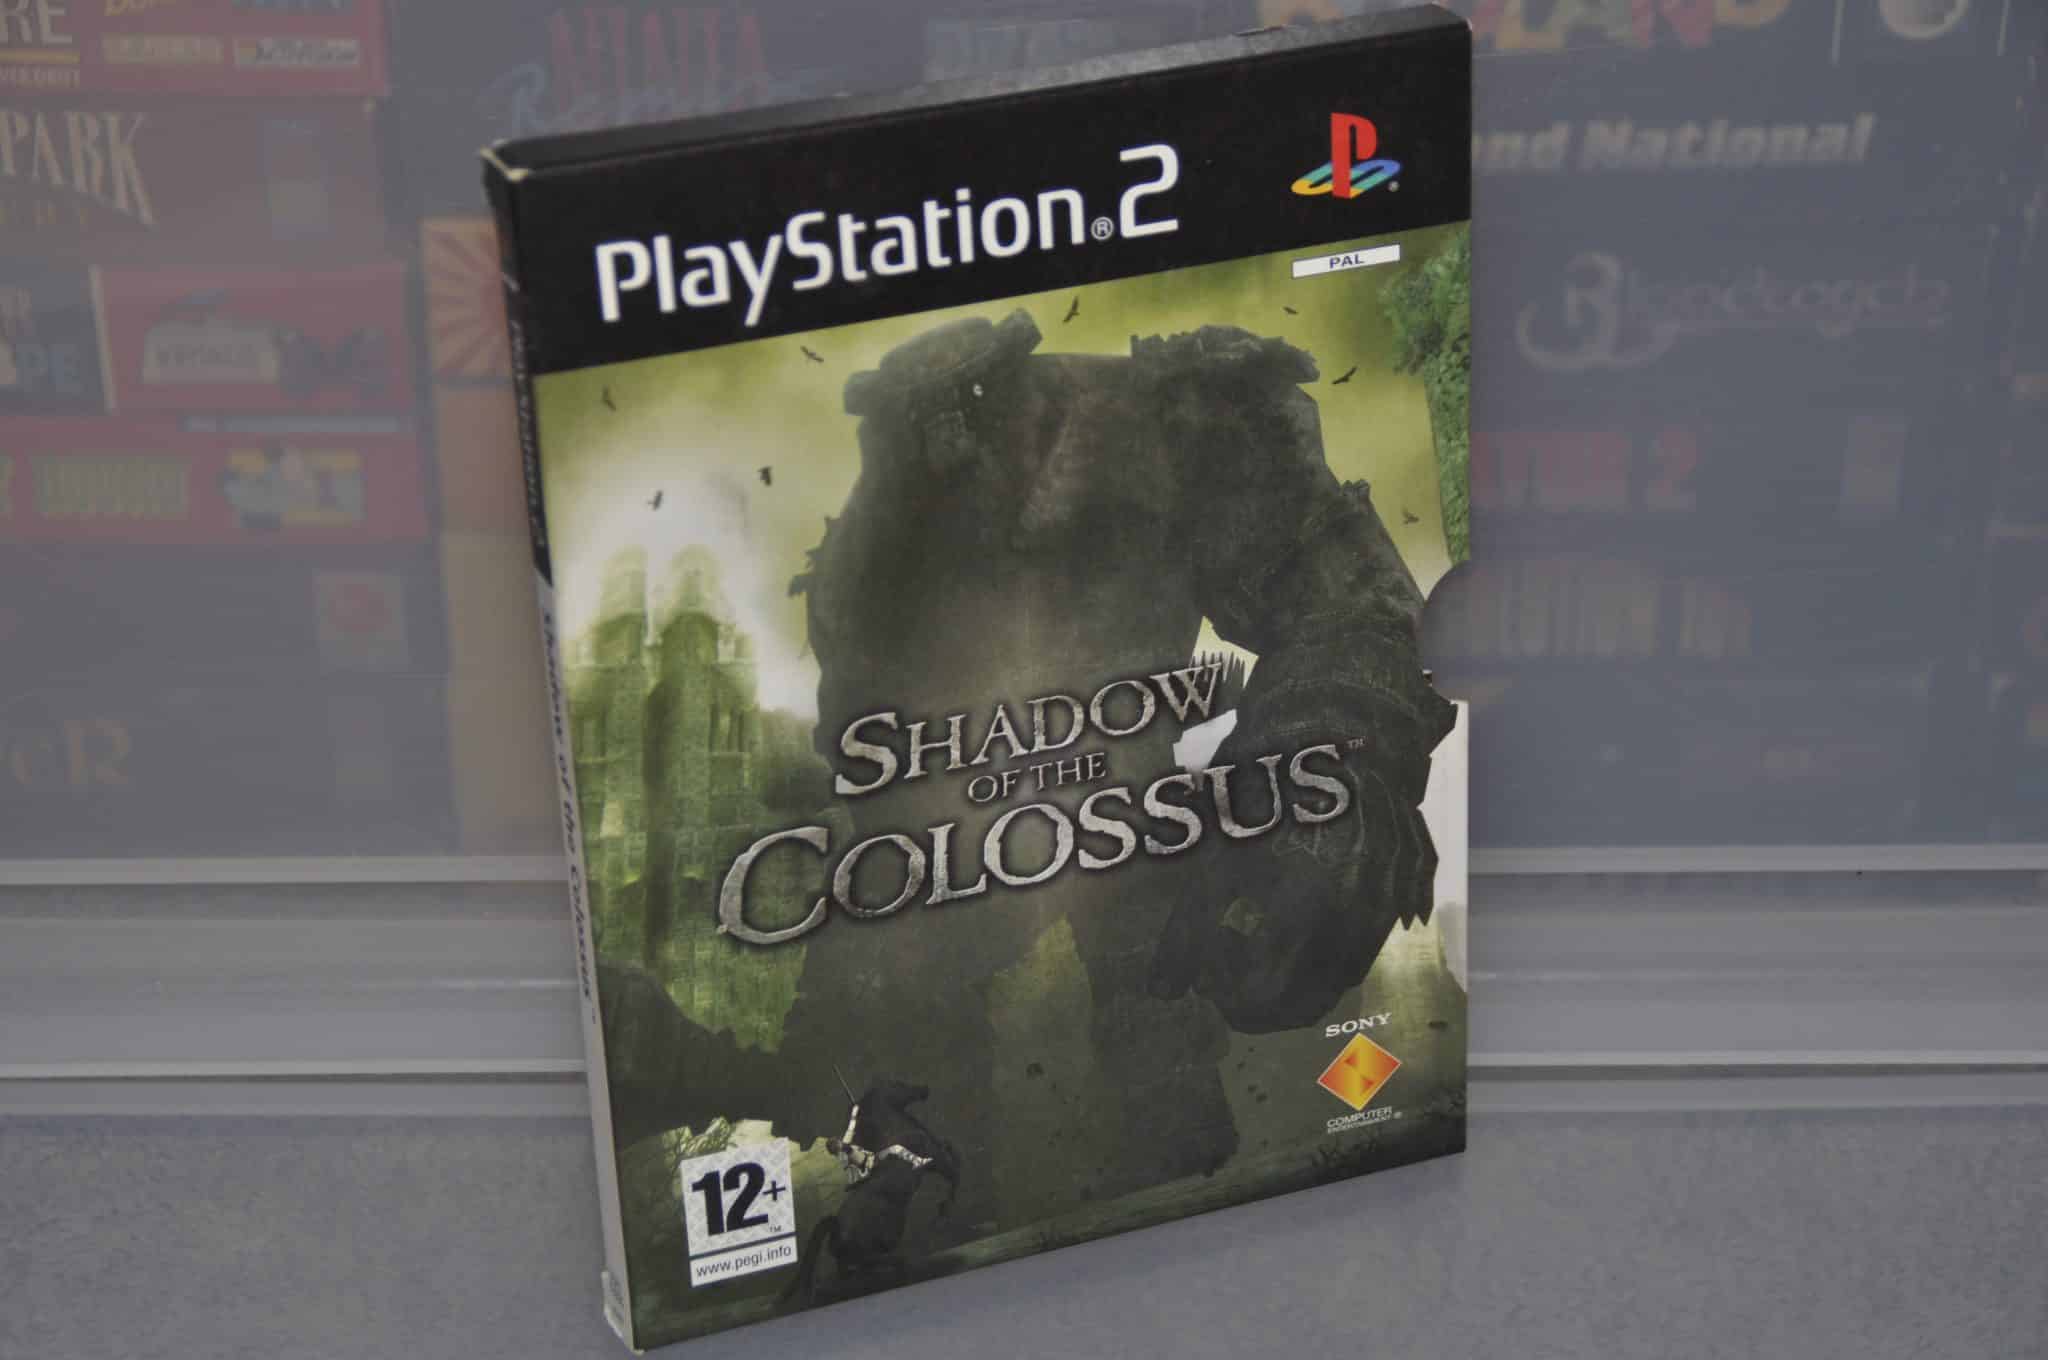 Shadow of the Colossus Sony PlayStation 2 limited edition ps2 pal,version